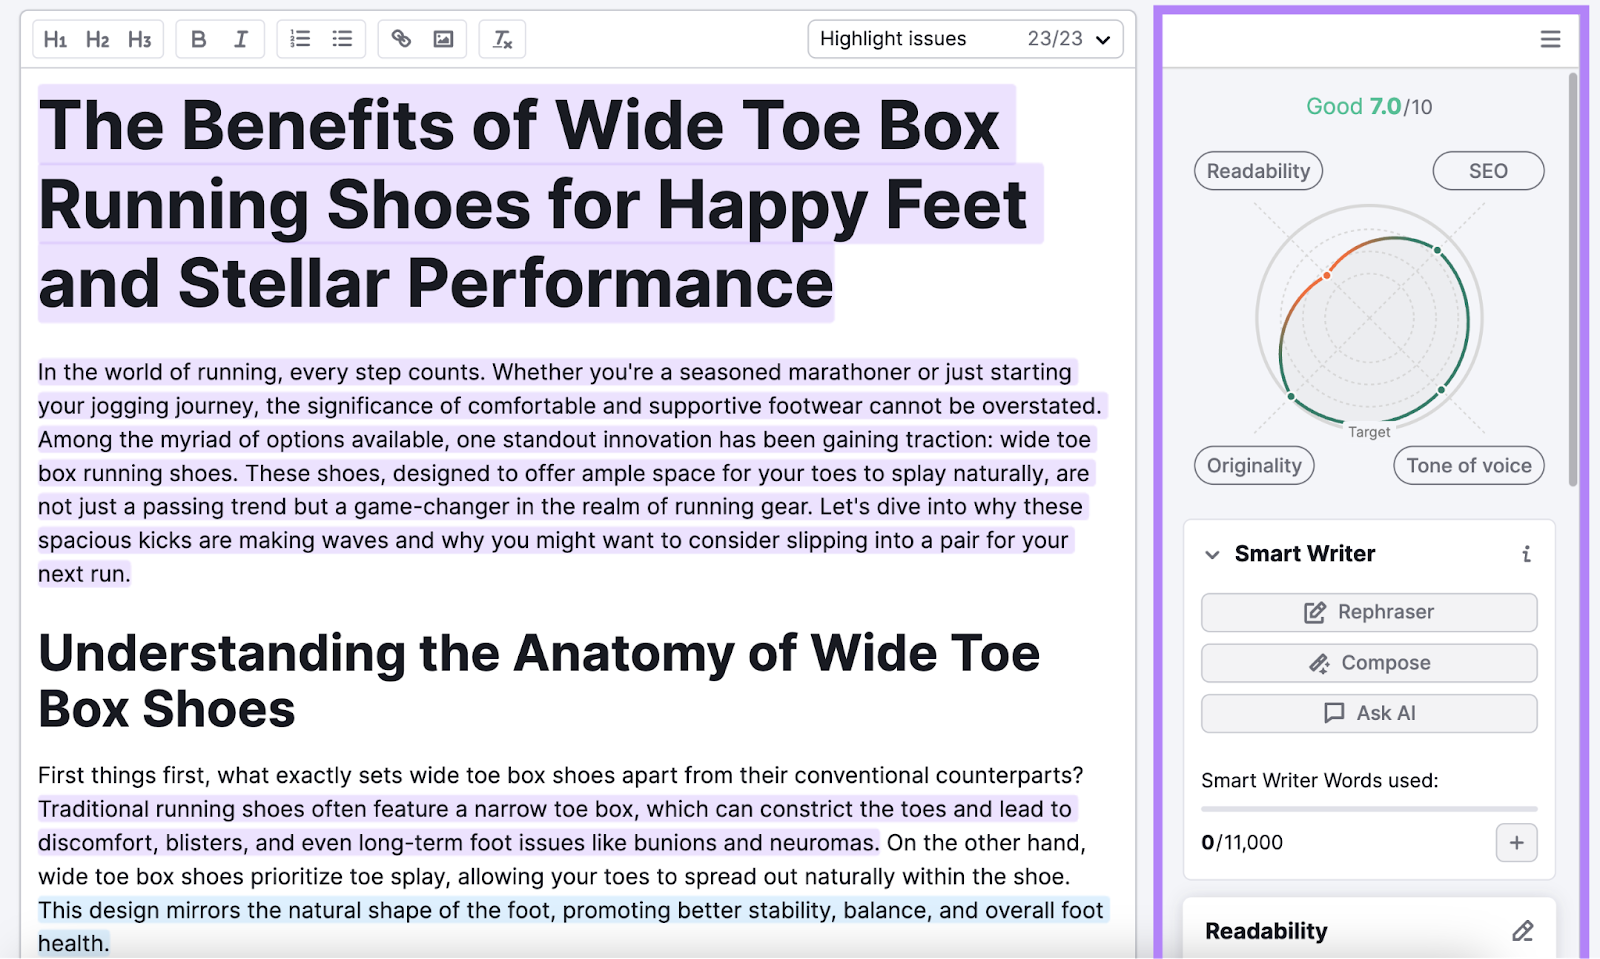 seo writing assistant shows score of 7/10 for an article in draft called benefits of wide toe box running shoes